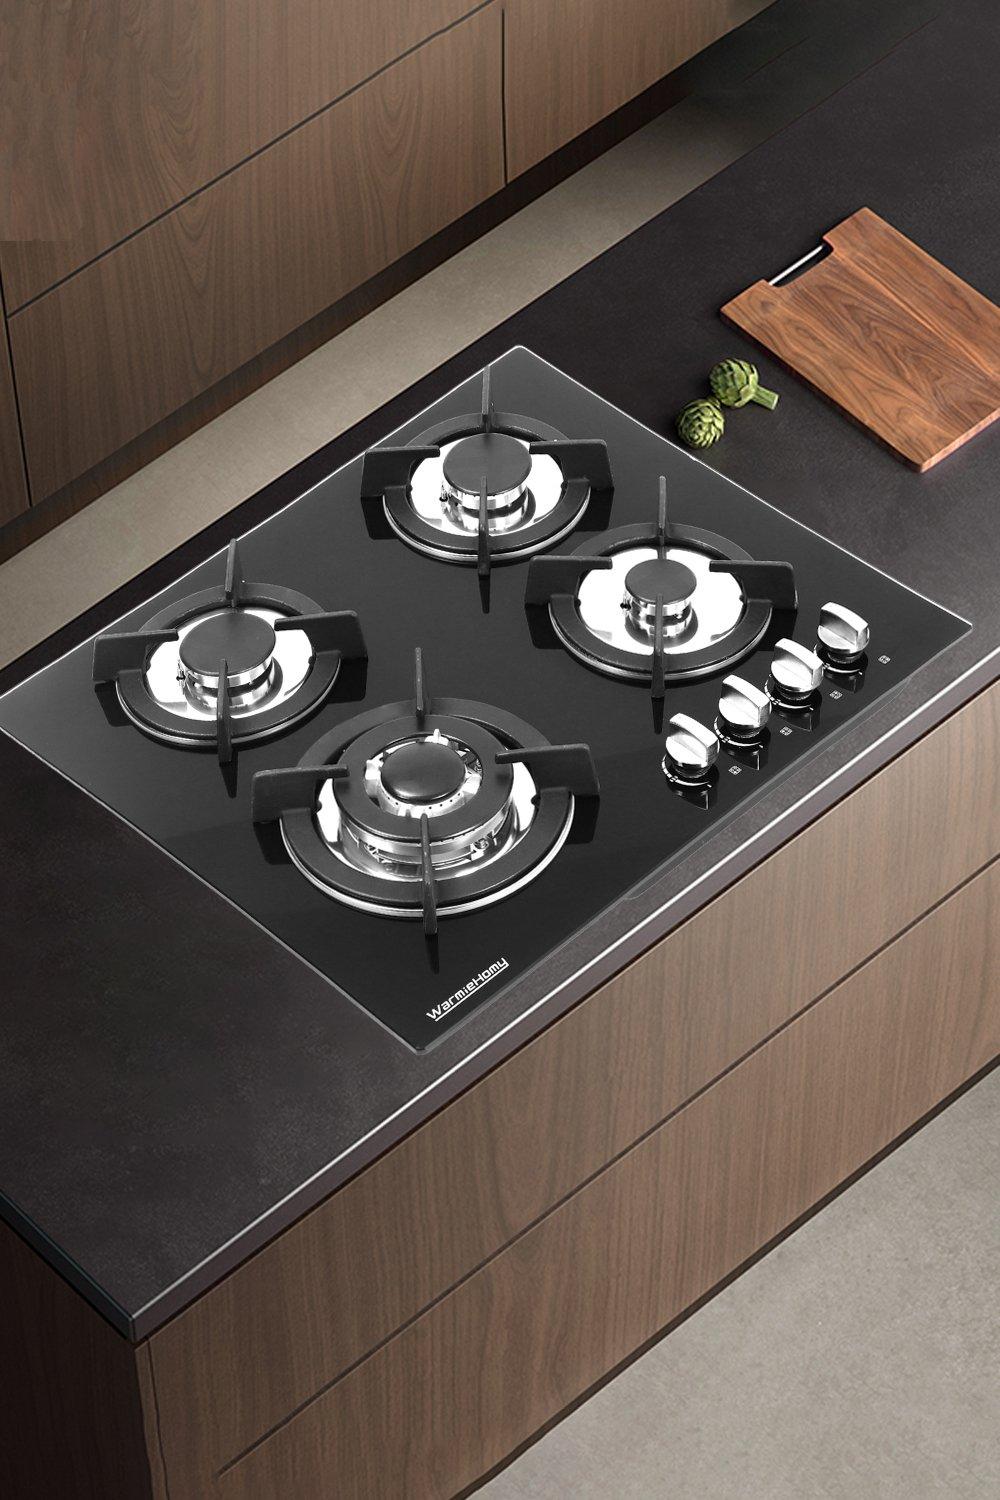 4-Burner Gas Cooktop with Cast Iron Pan Stands Stainless Steel & Black Tempered Glass Top(56 x 48 cm